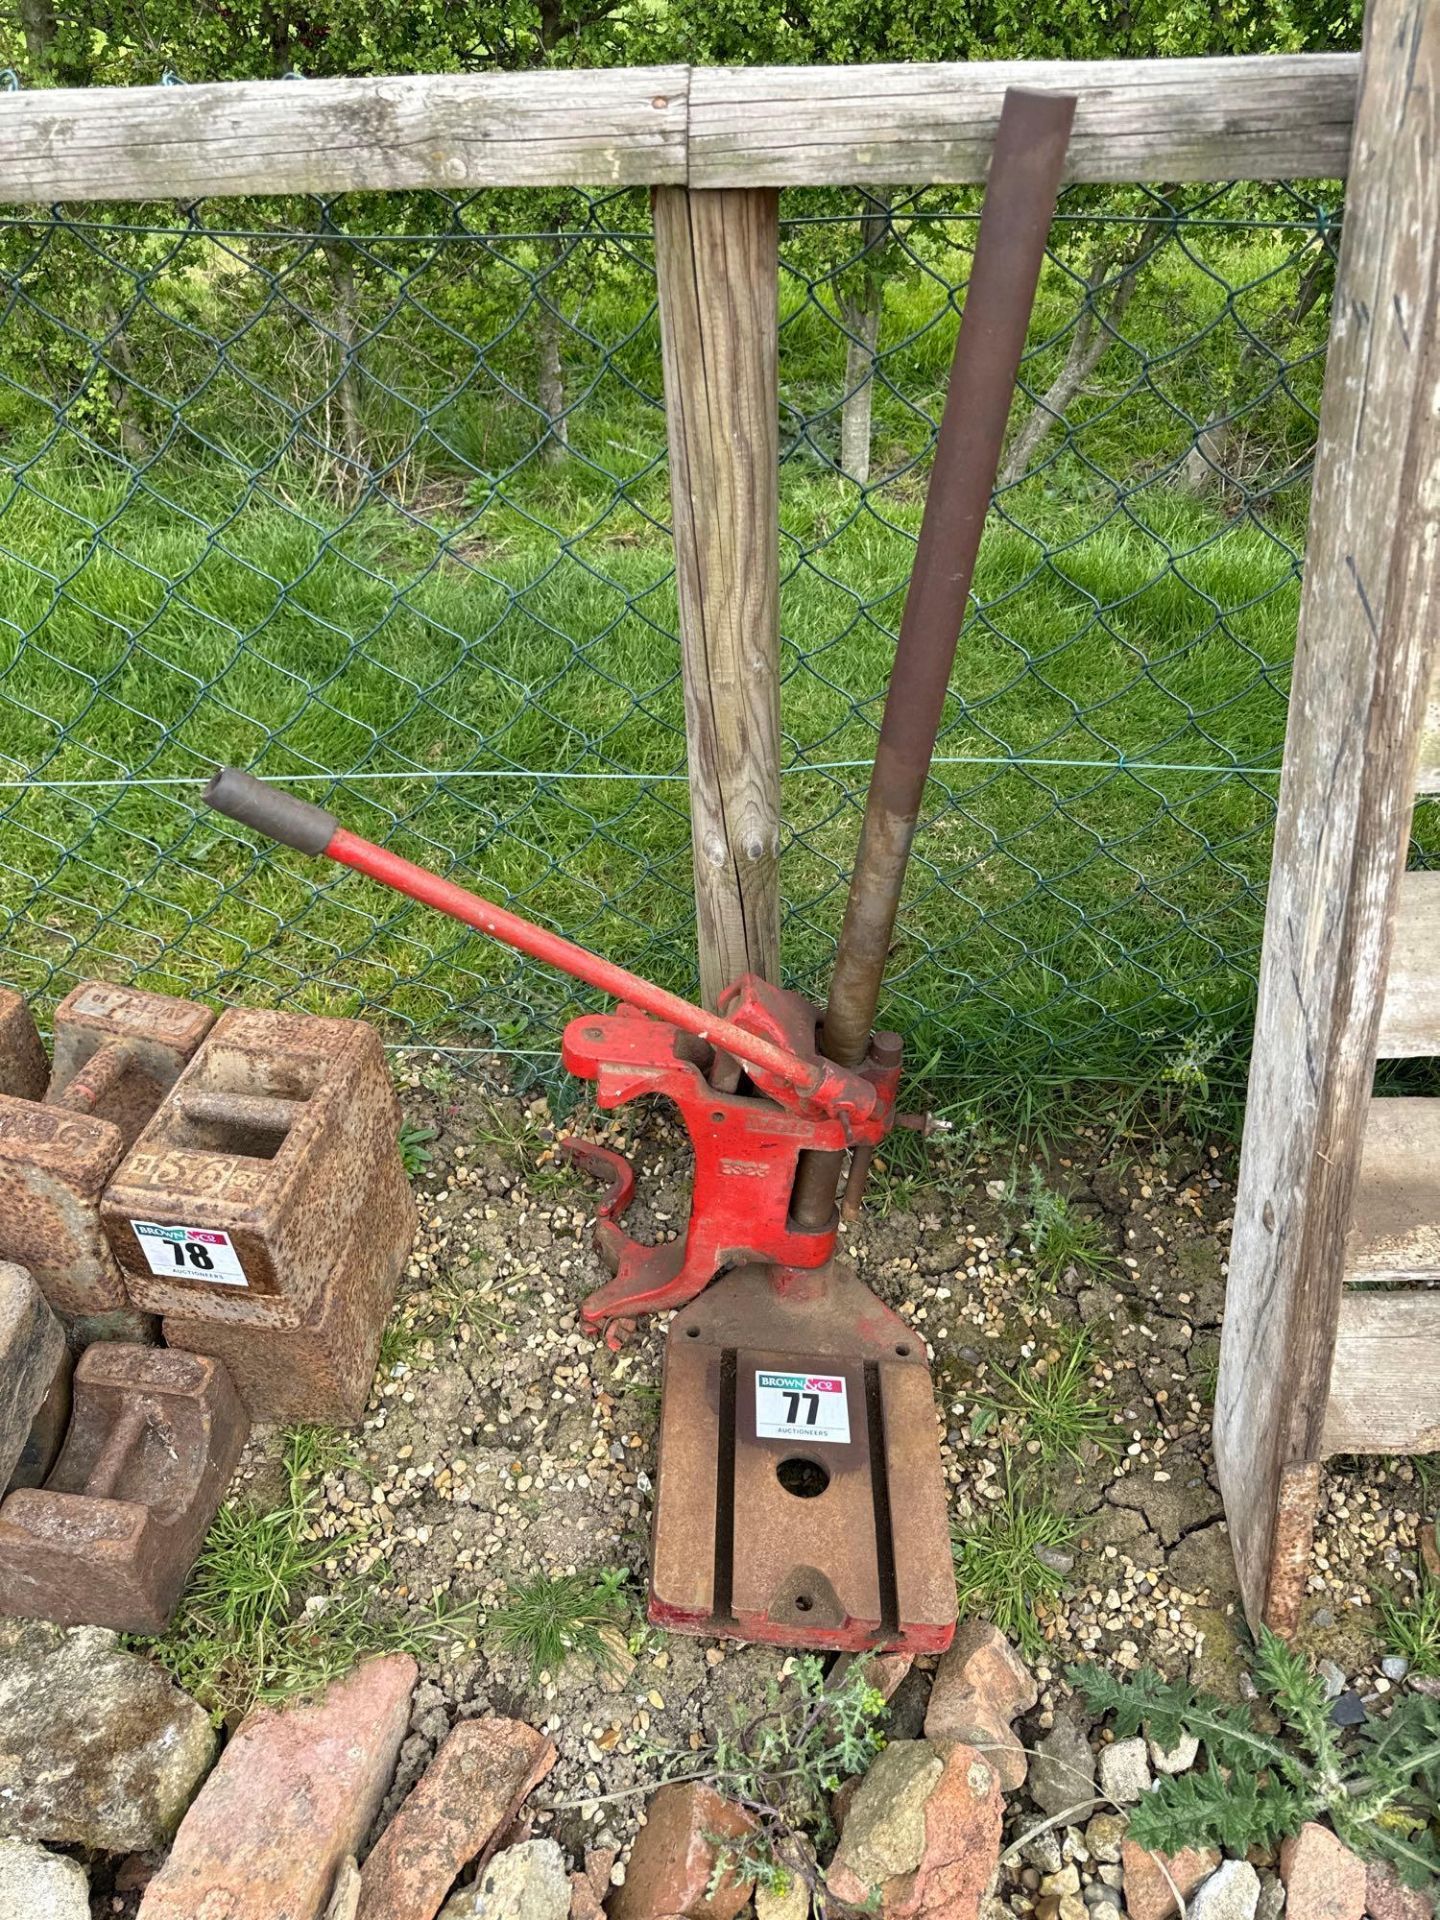 Vintage hand operated pillar drill stand